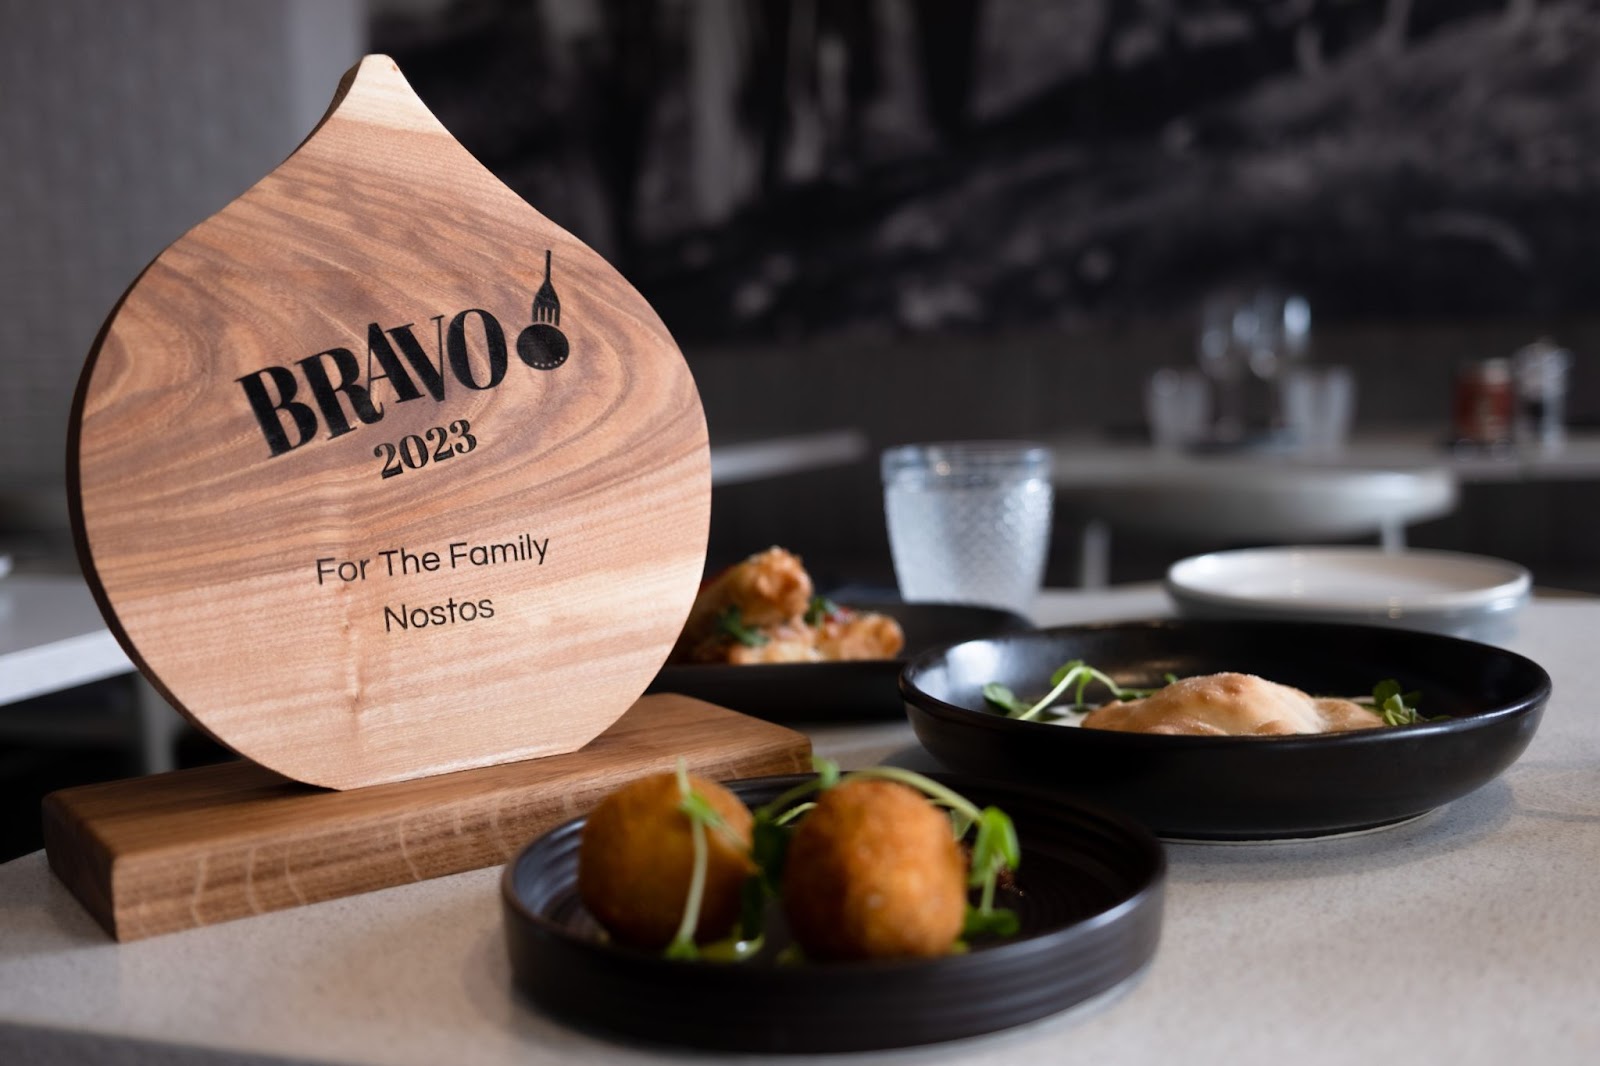 Image shows BRAVOs award given to Nostos for 'Best for the Family' 2023